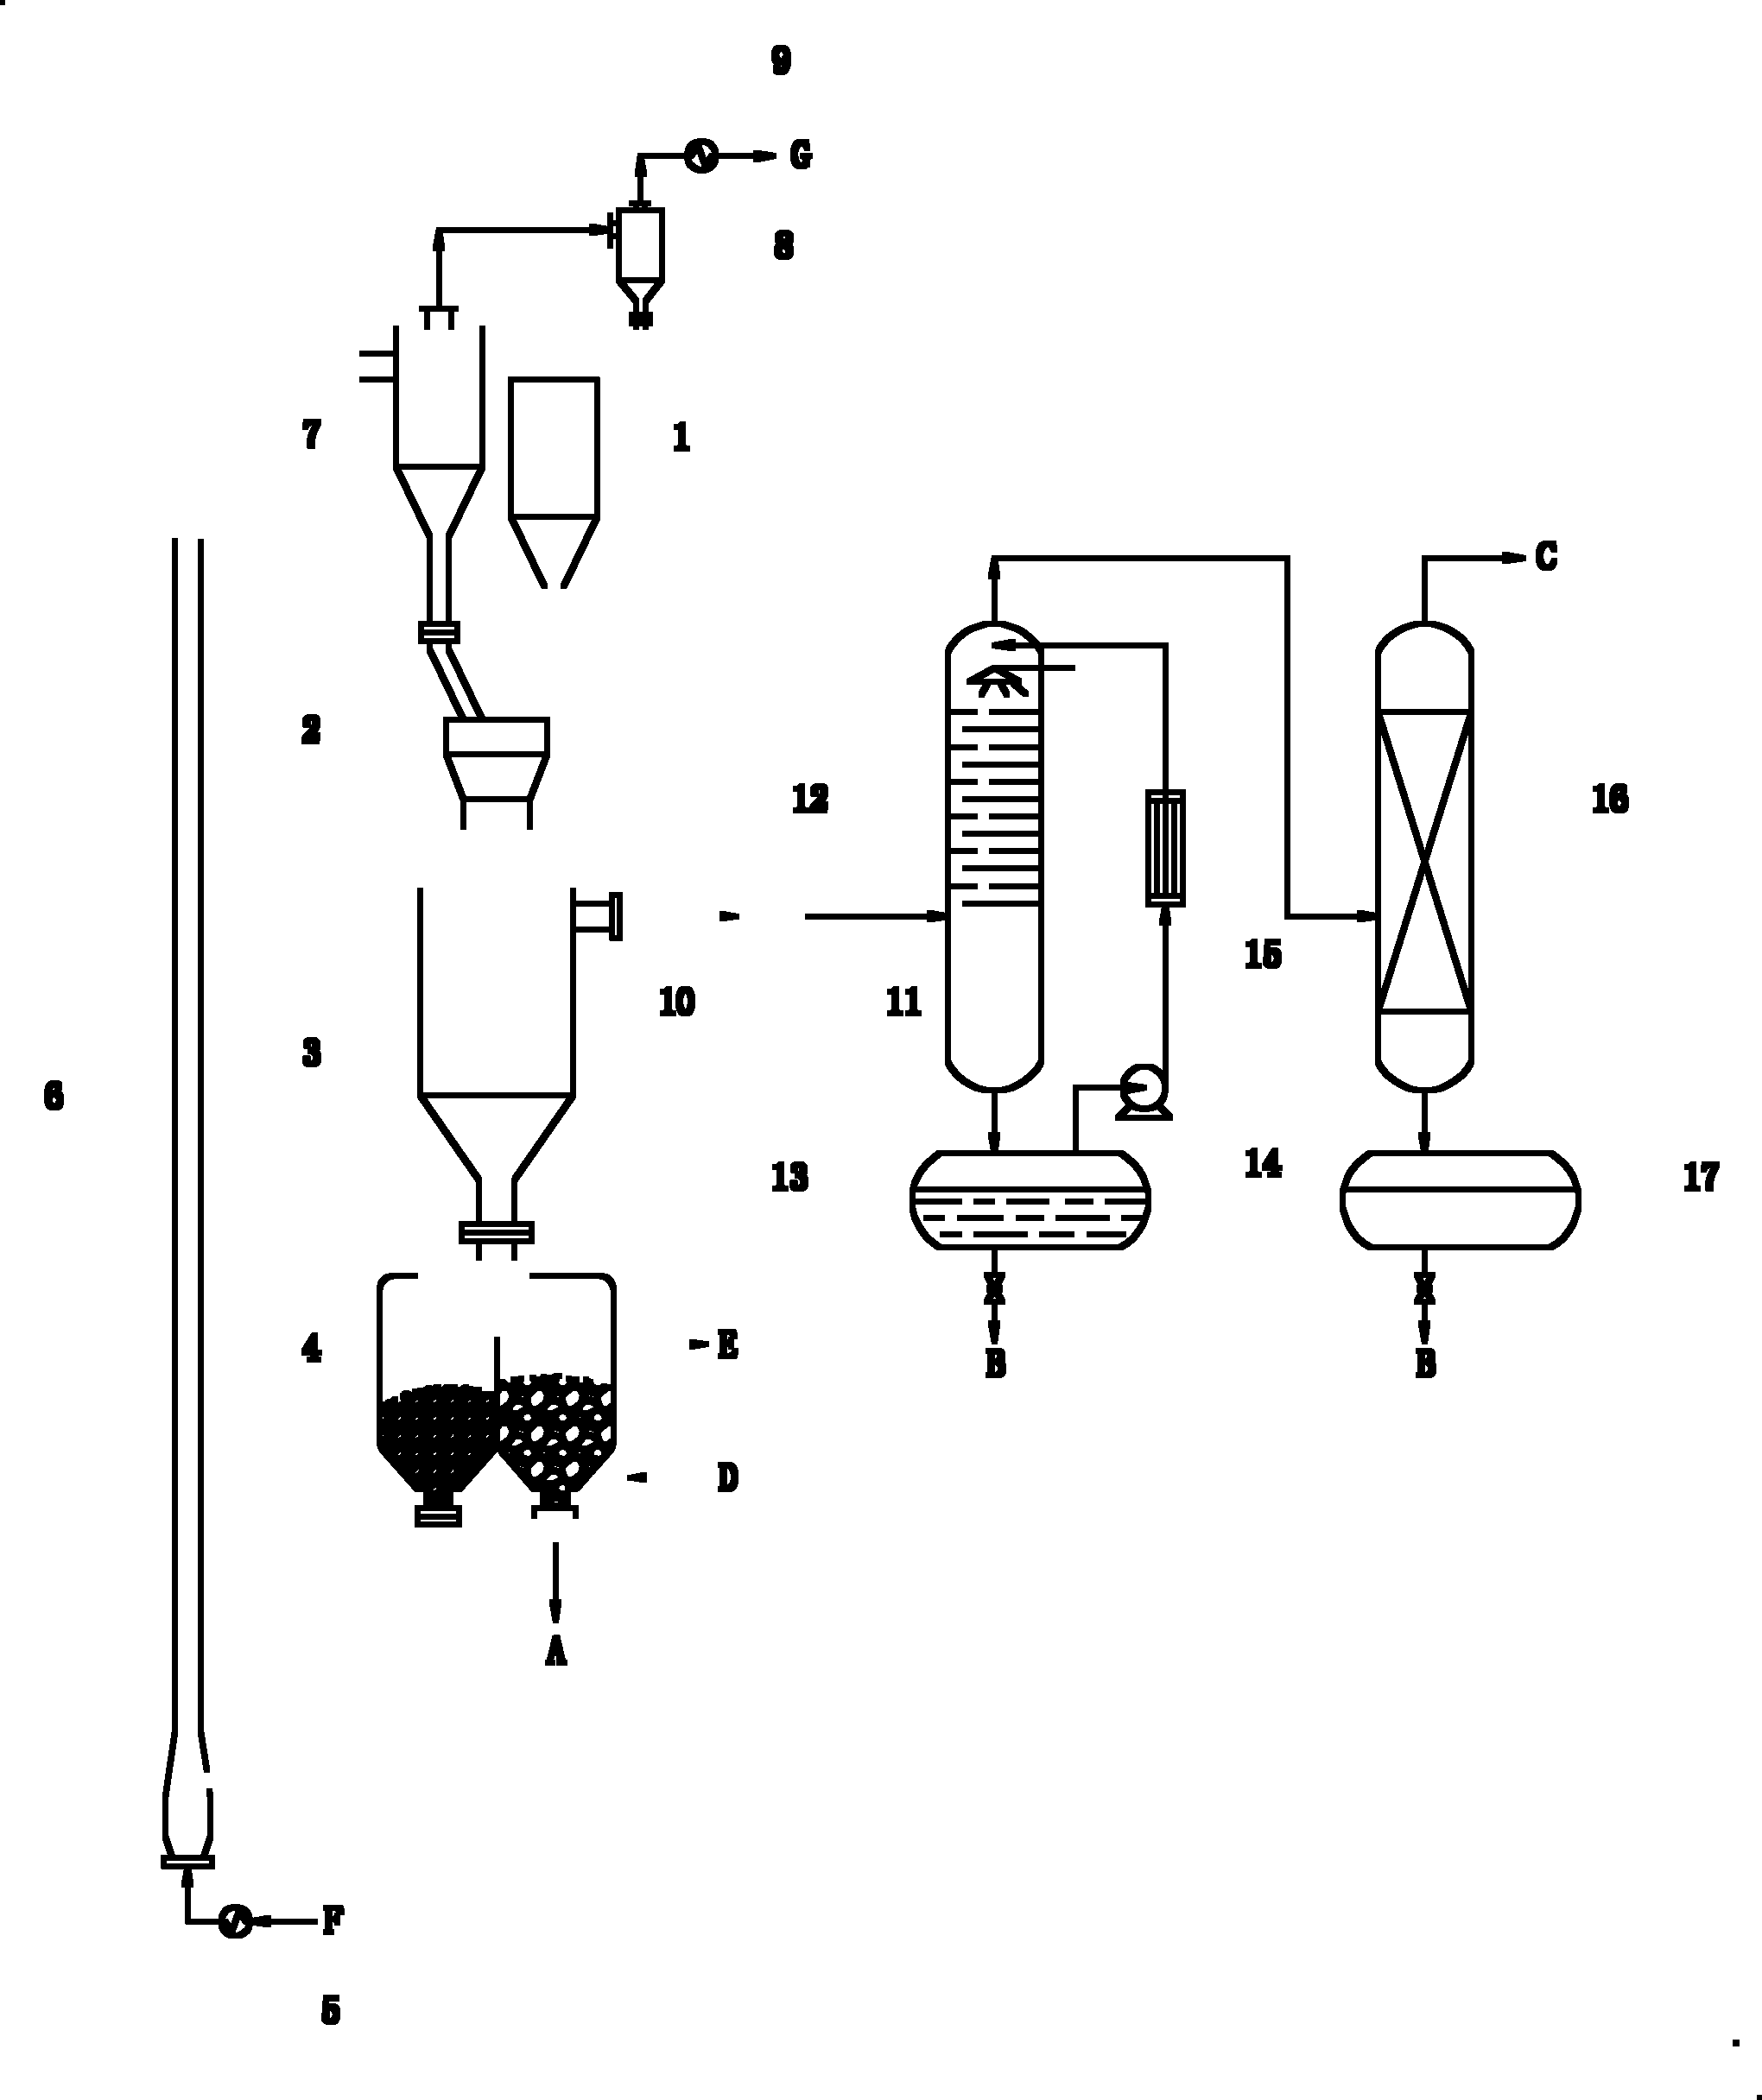 Method for preparing semicoke, empyreumatic oil and coal gas by pyrolyzing coal